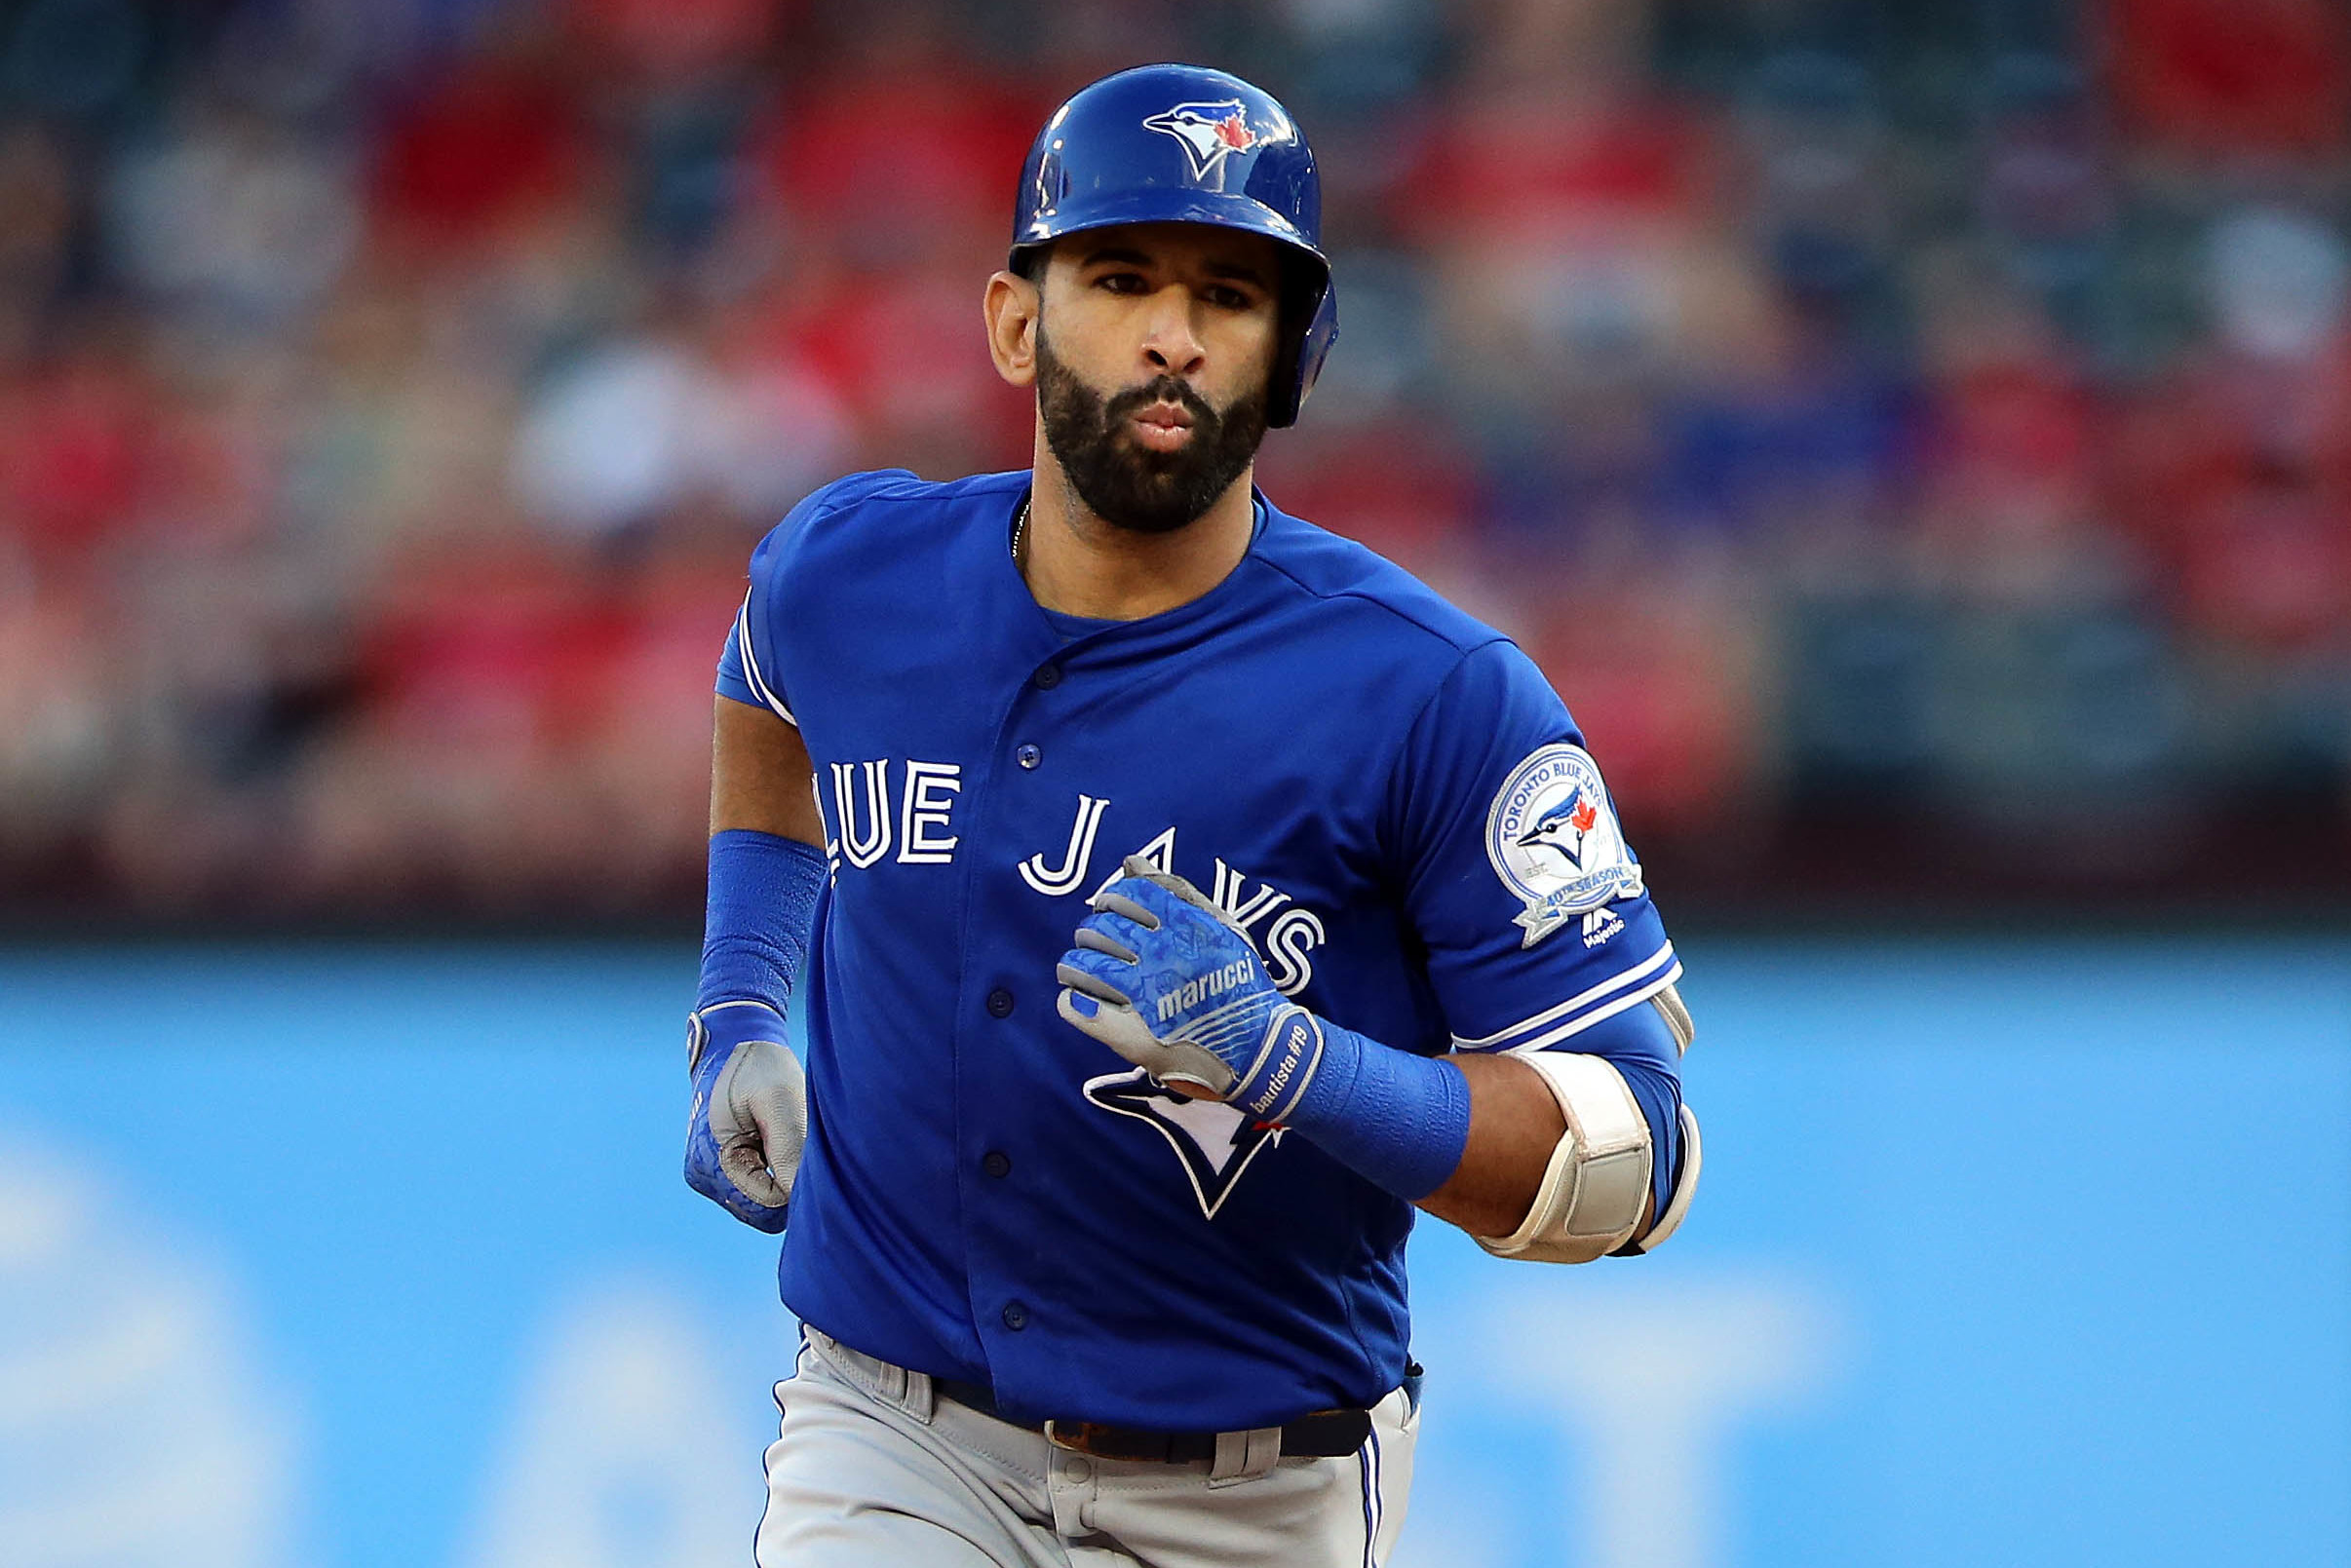 Blue Jays: José Bautista bobblehead day in August is absolutely